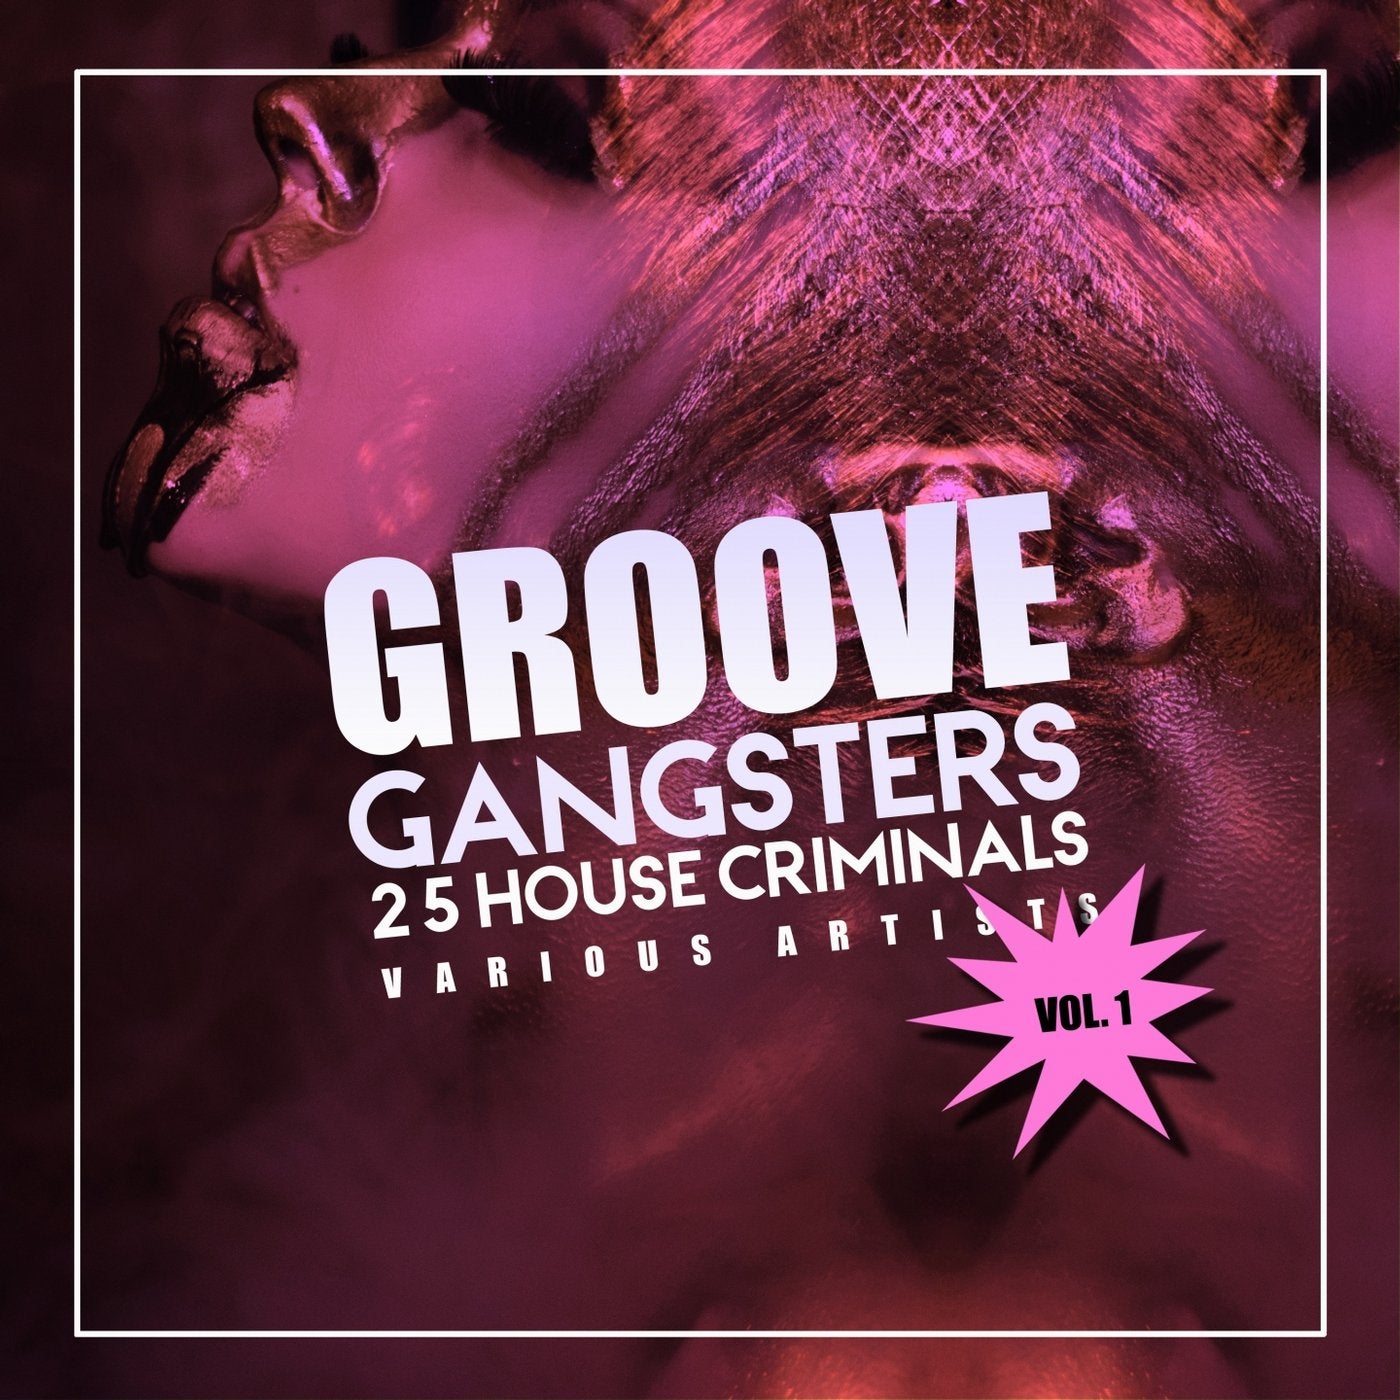 Groove Gangsters, Vol. 1 (25 House Criminals)